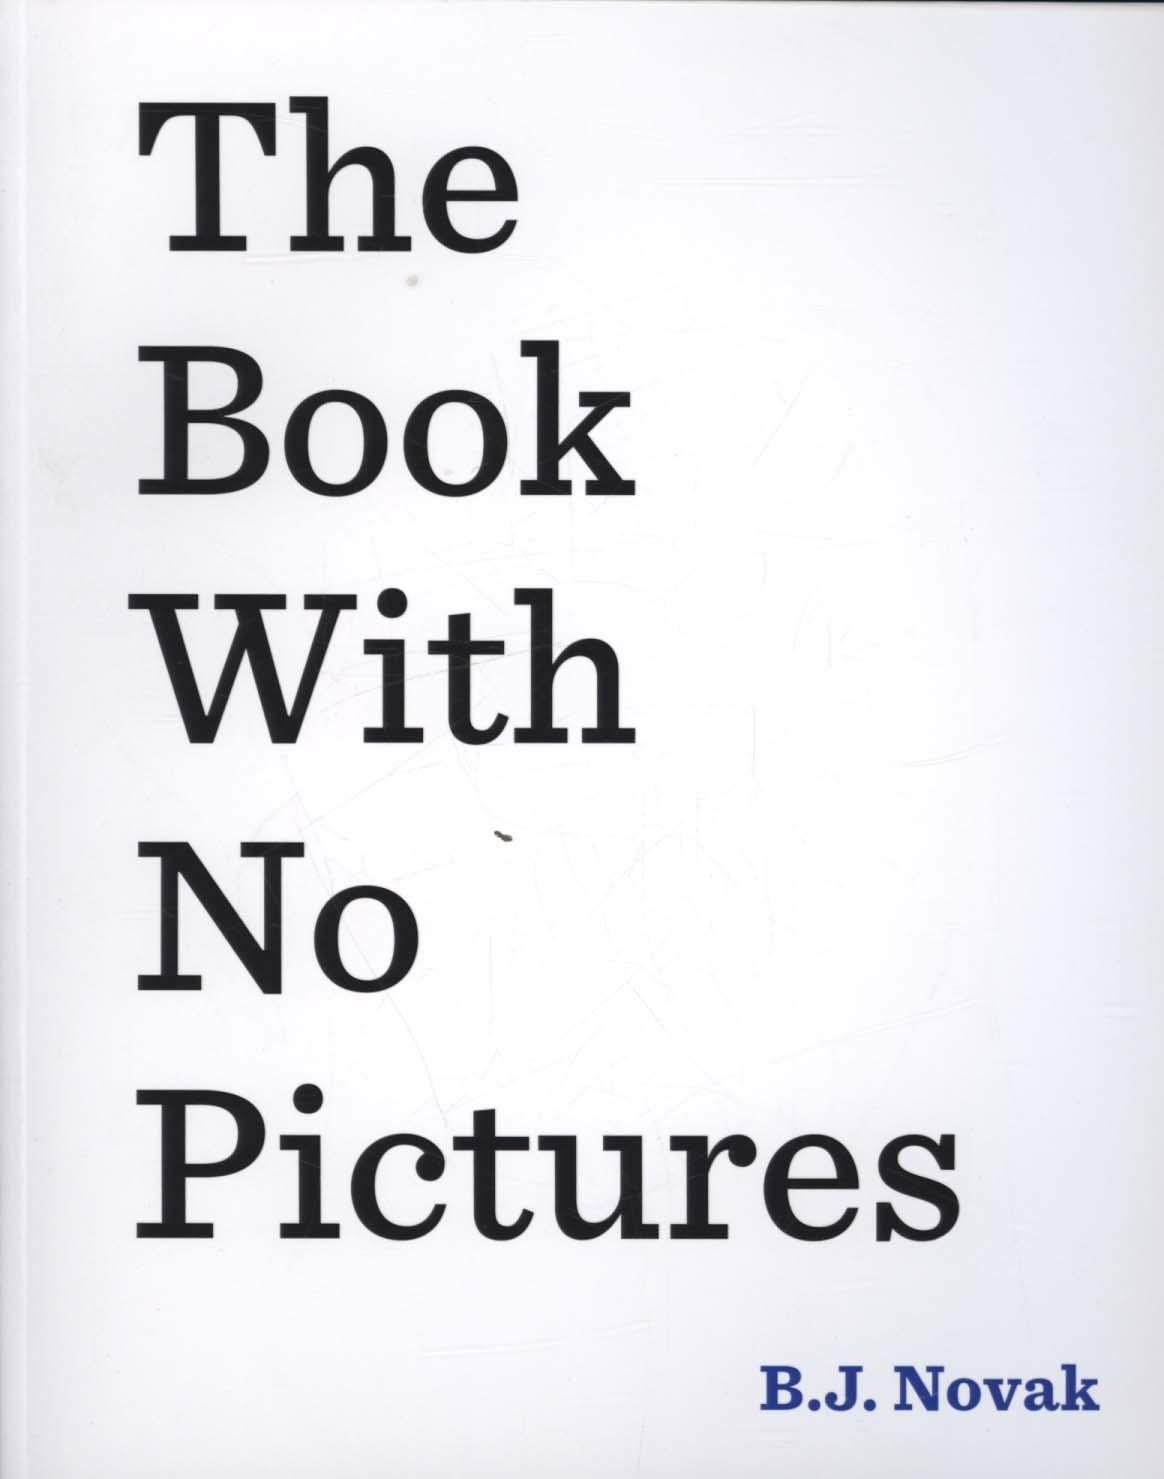 Book with No Pictures